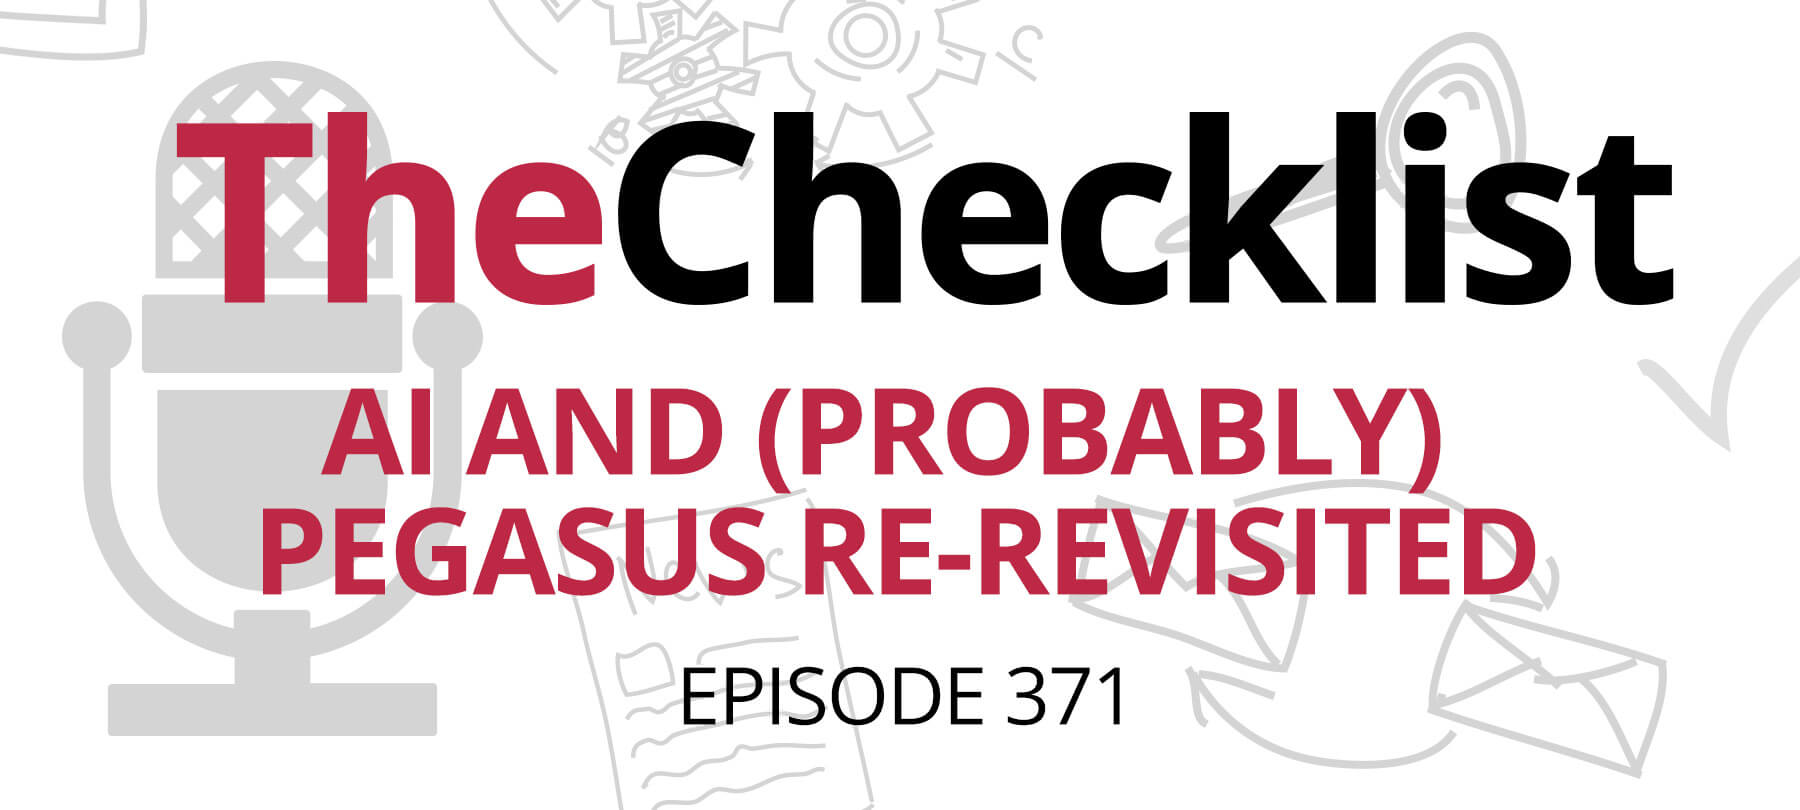 Checklist 371: AI and (Probably) Pegasus Re-Revisited Header image